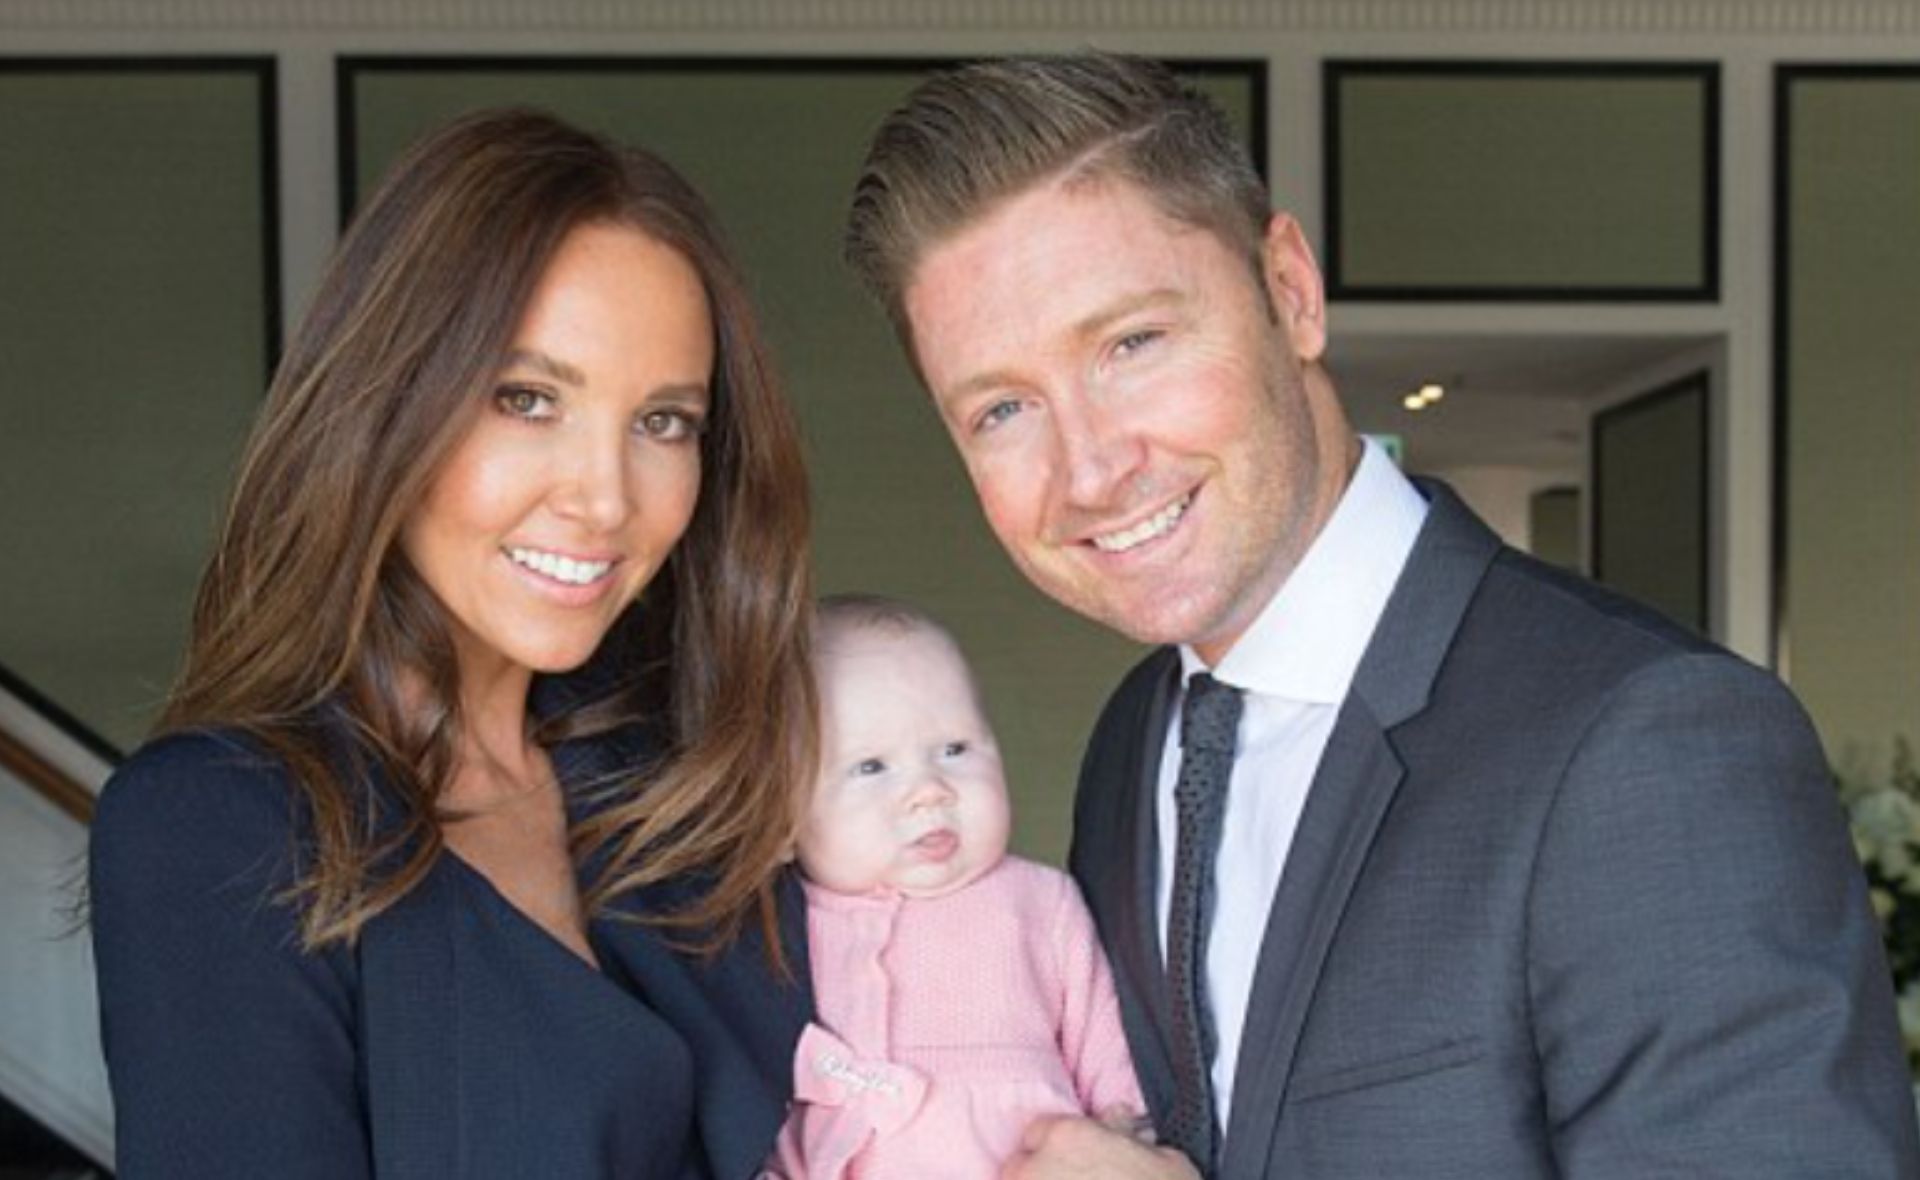 All the cutest photos of Michael Clarke’s daughter Kelsey!